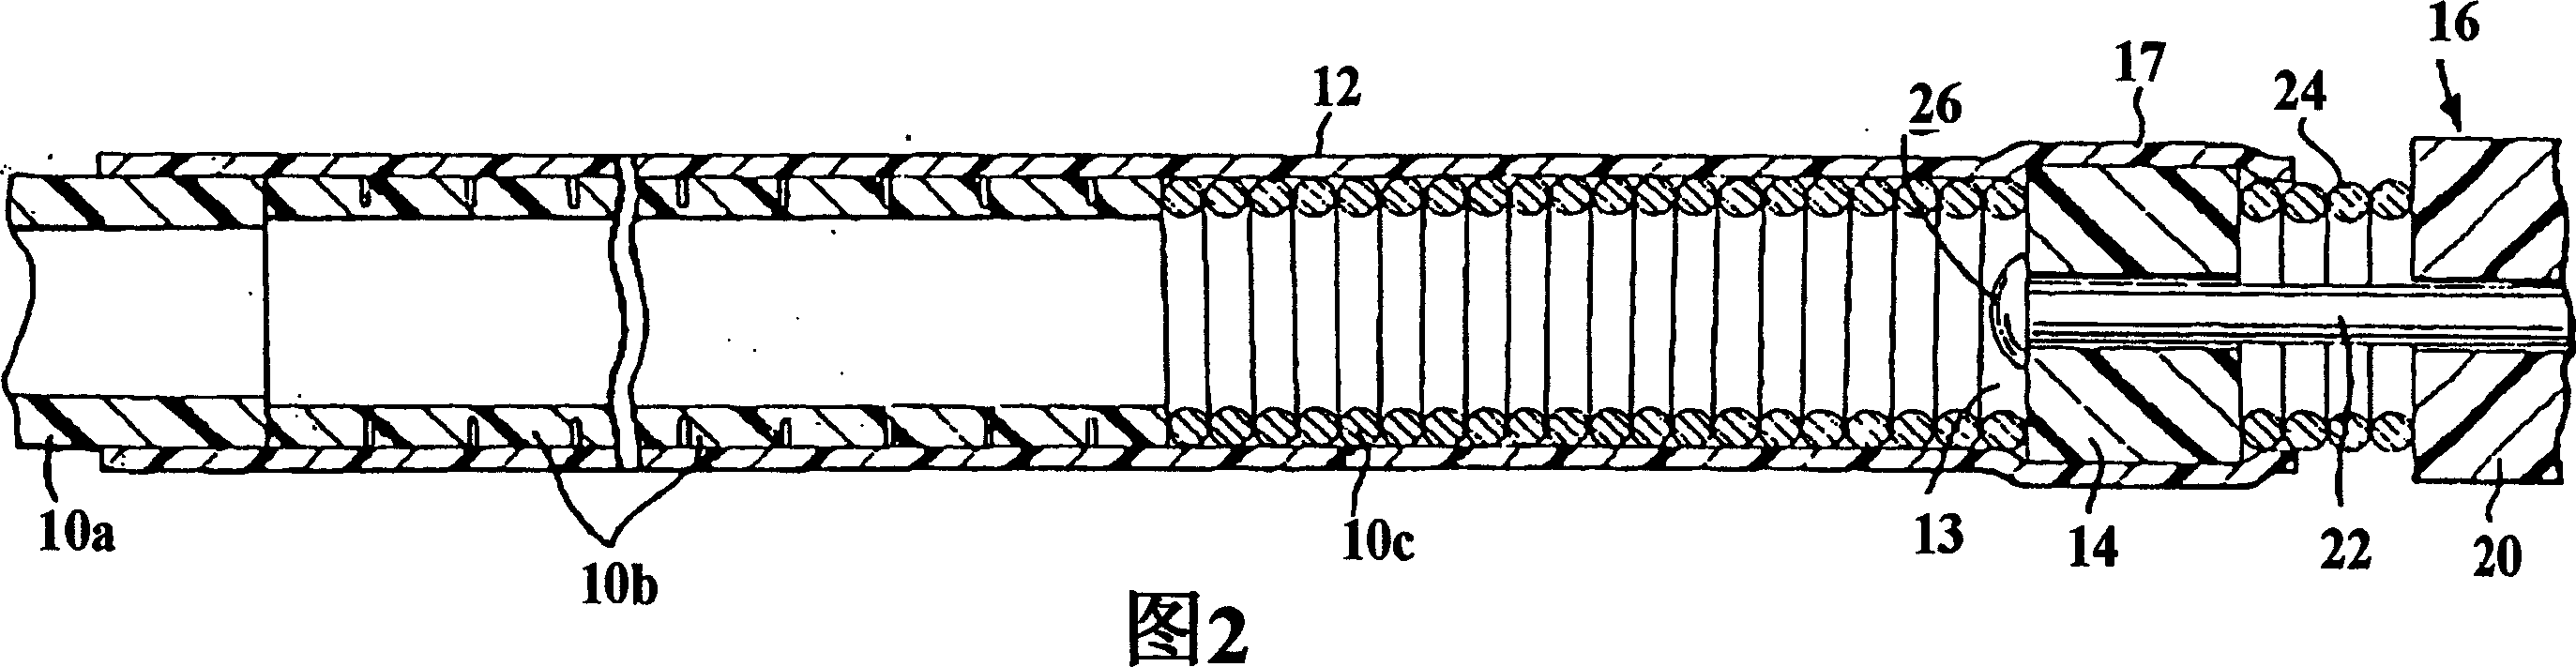 Mechanism for the deployment of endovascular implants